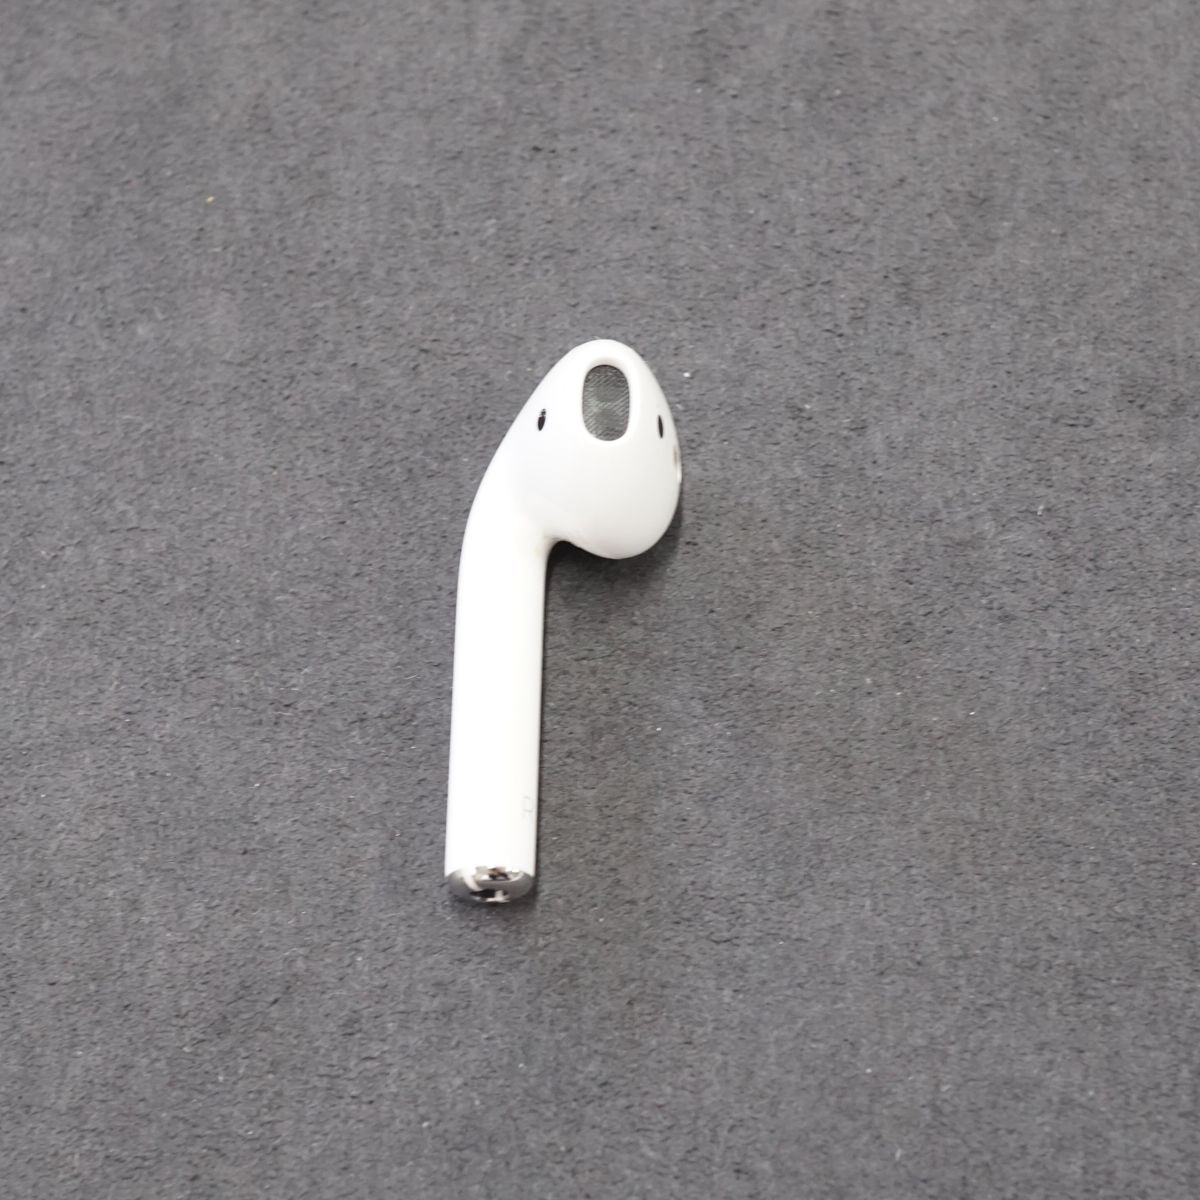 Apple AirPods air pozUSED beautiful goods right earphone only R one-side ear A2032 second generation regular goods MV7N2J/A working properly goods used T V9171